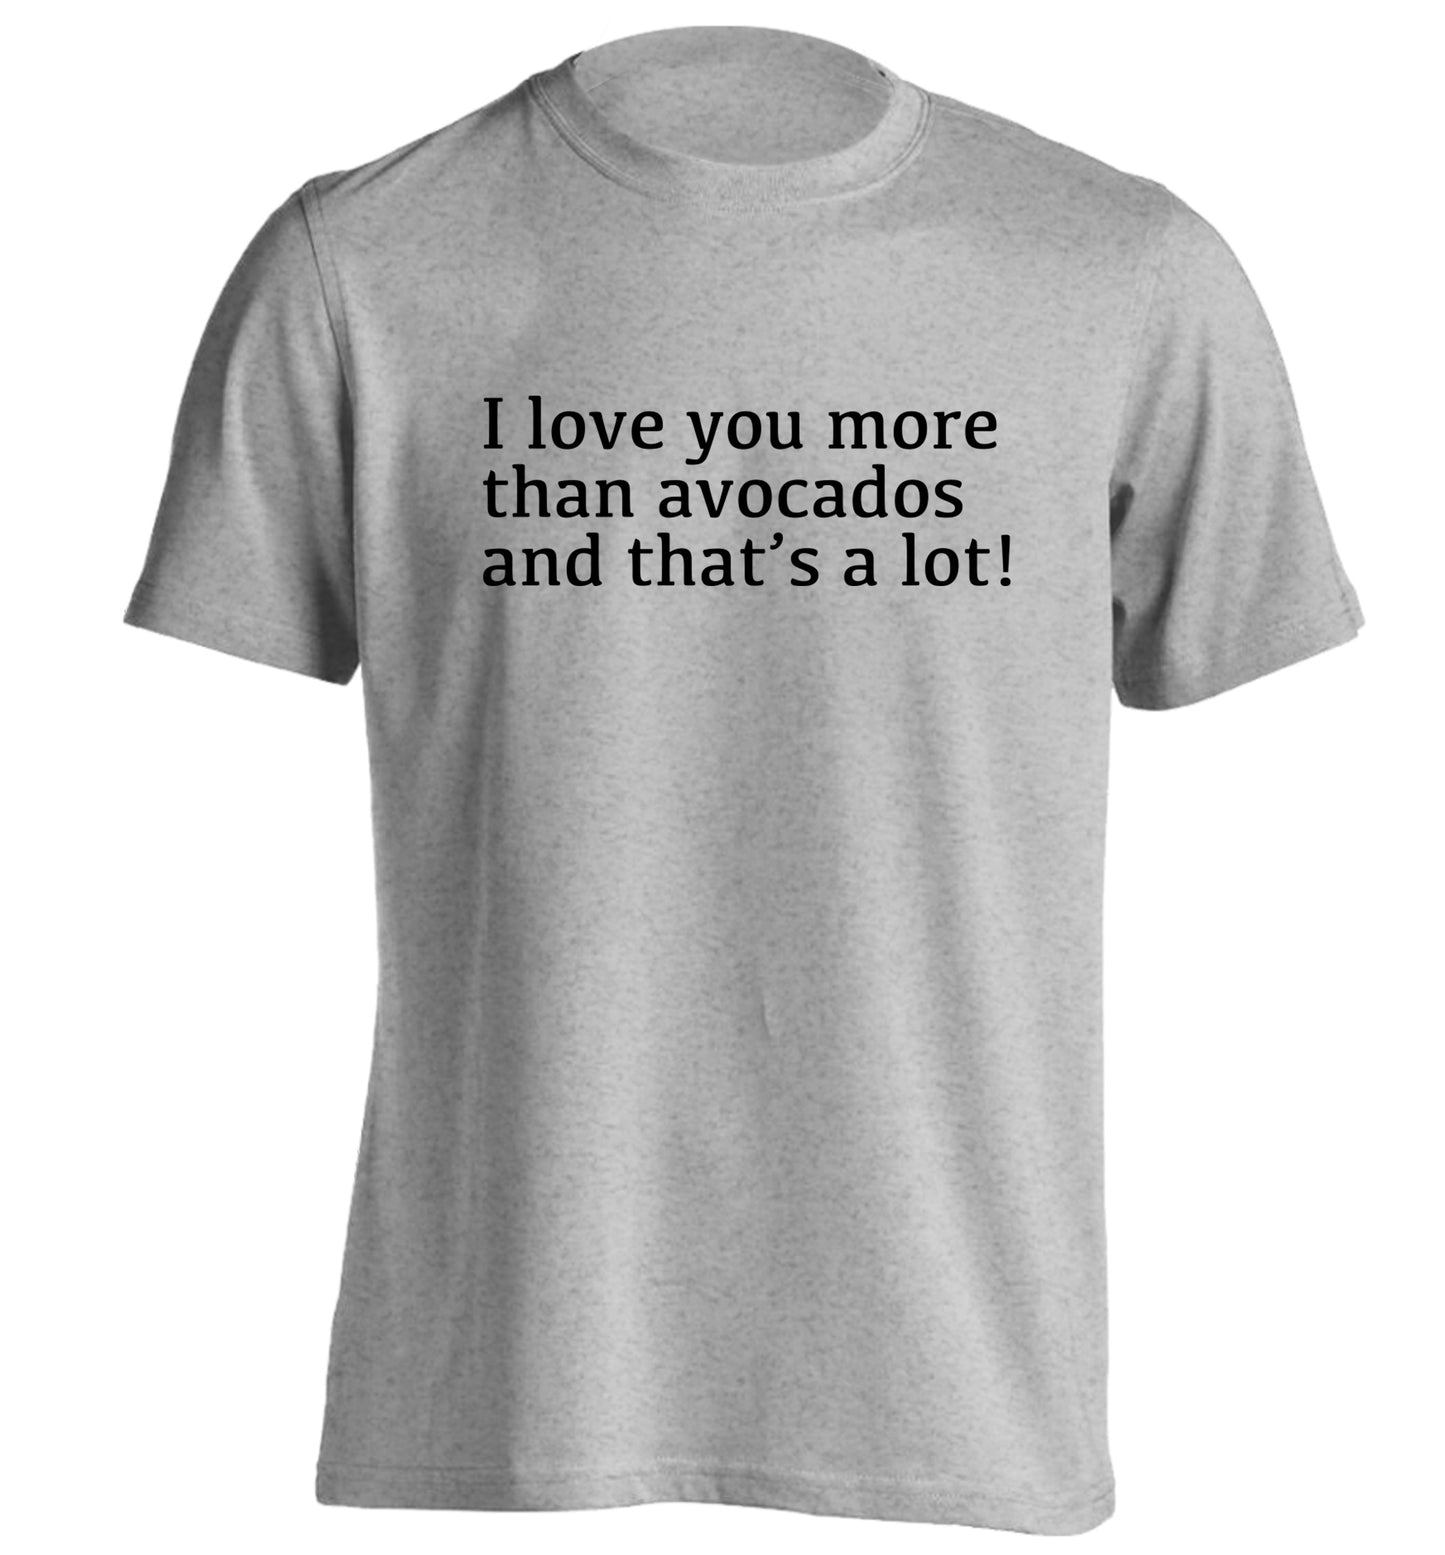 I love you more than avocados and that's a lot adults unisex grey Tshirt 2XL